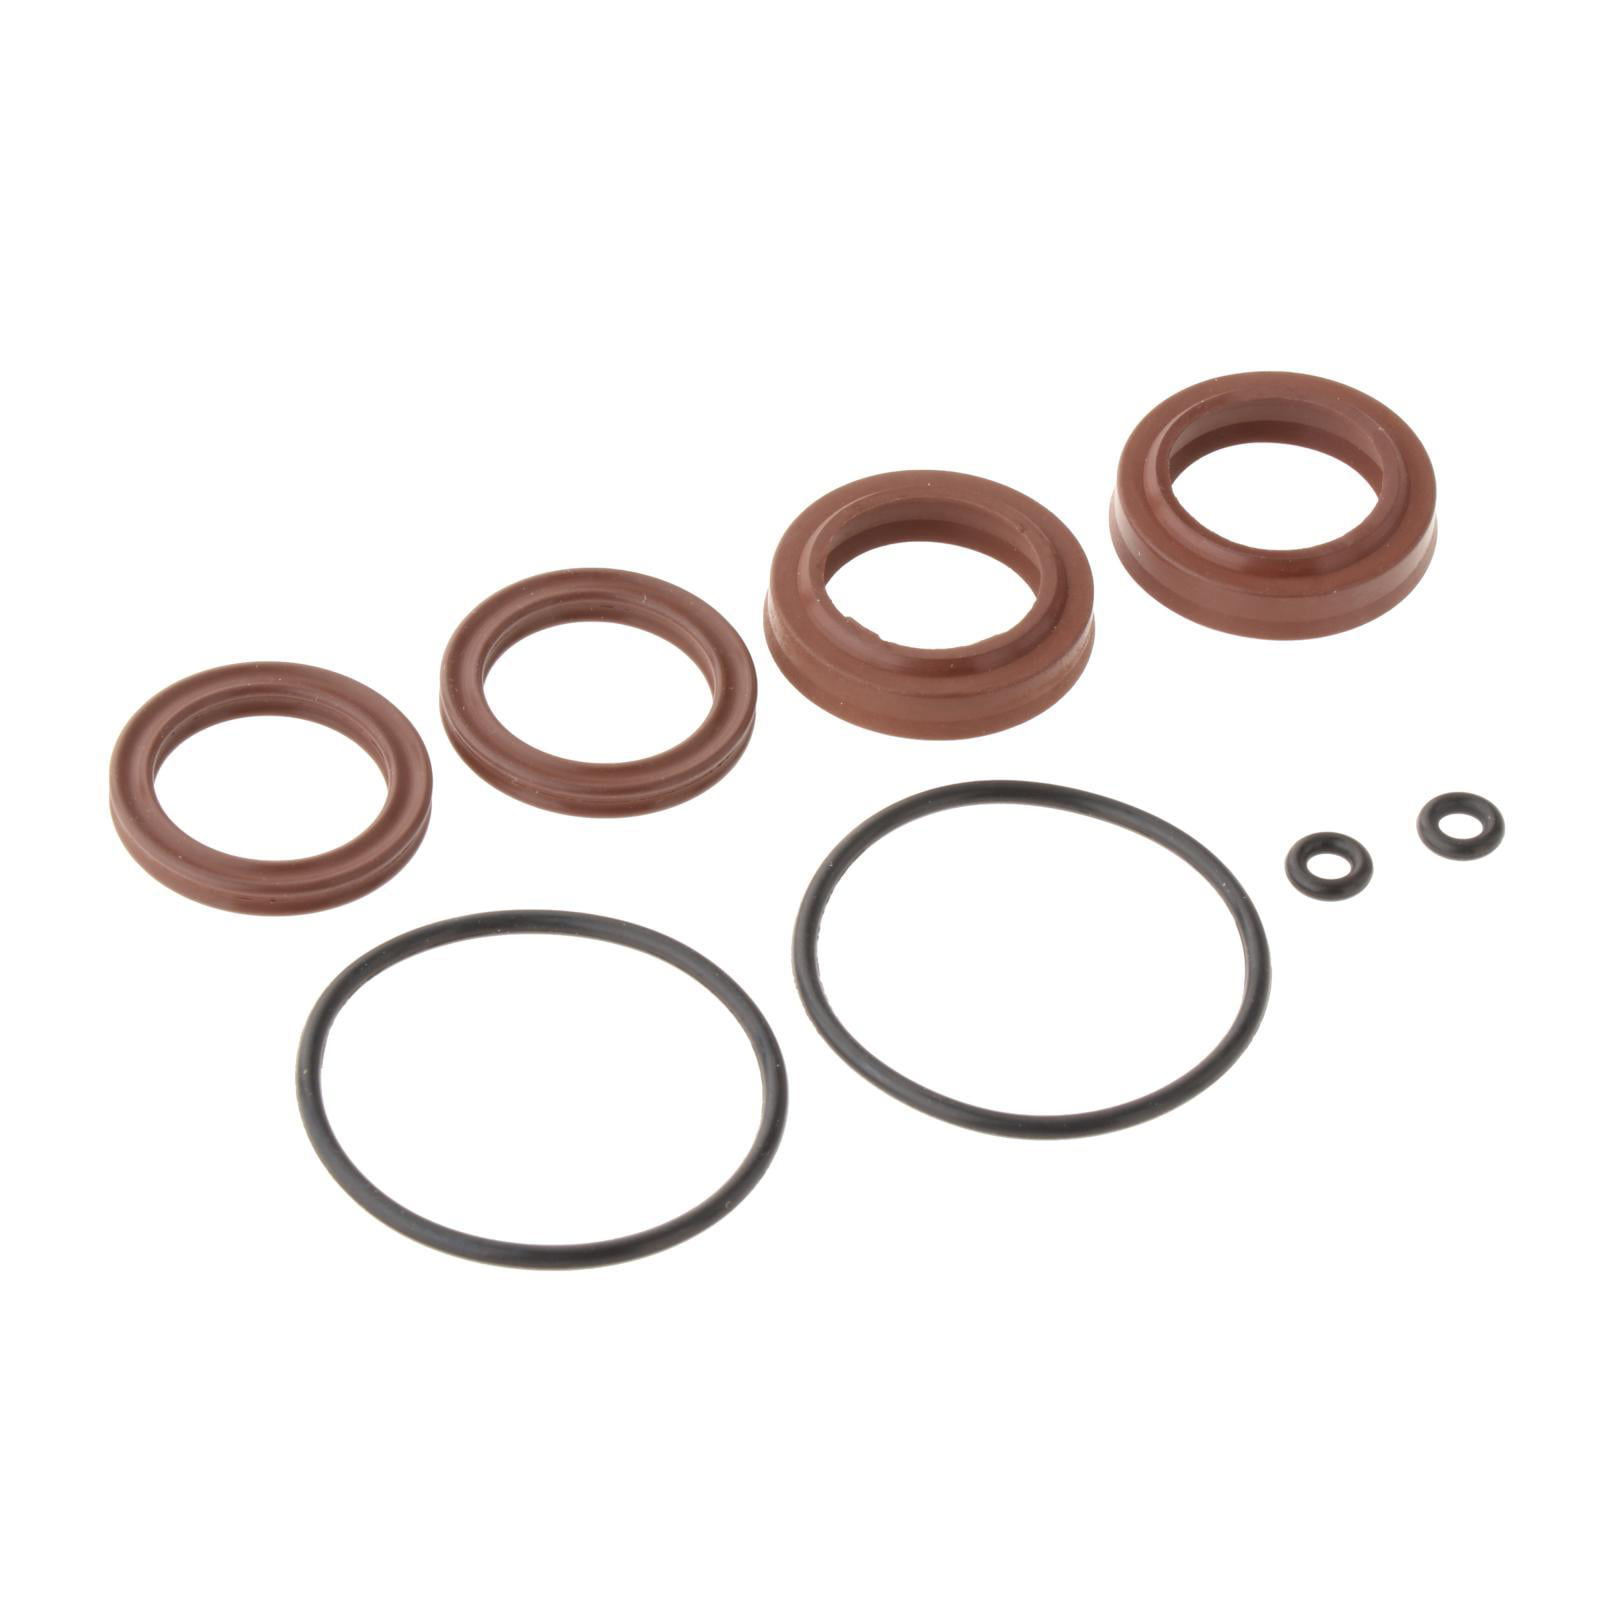 LAIKOU for Seastar Teleflex Steering Cylinder replacement seal kit HC5345 Others FSM051 